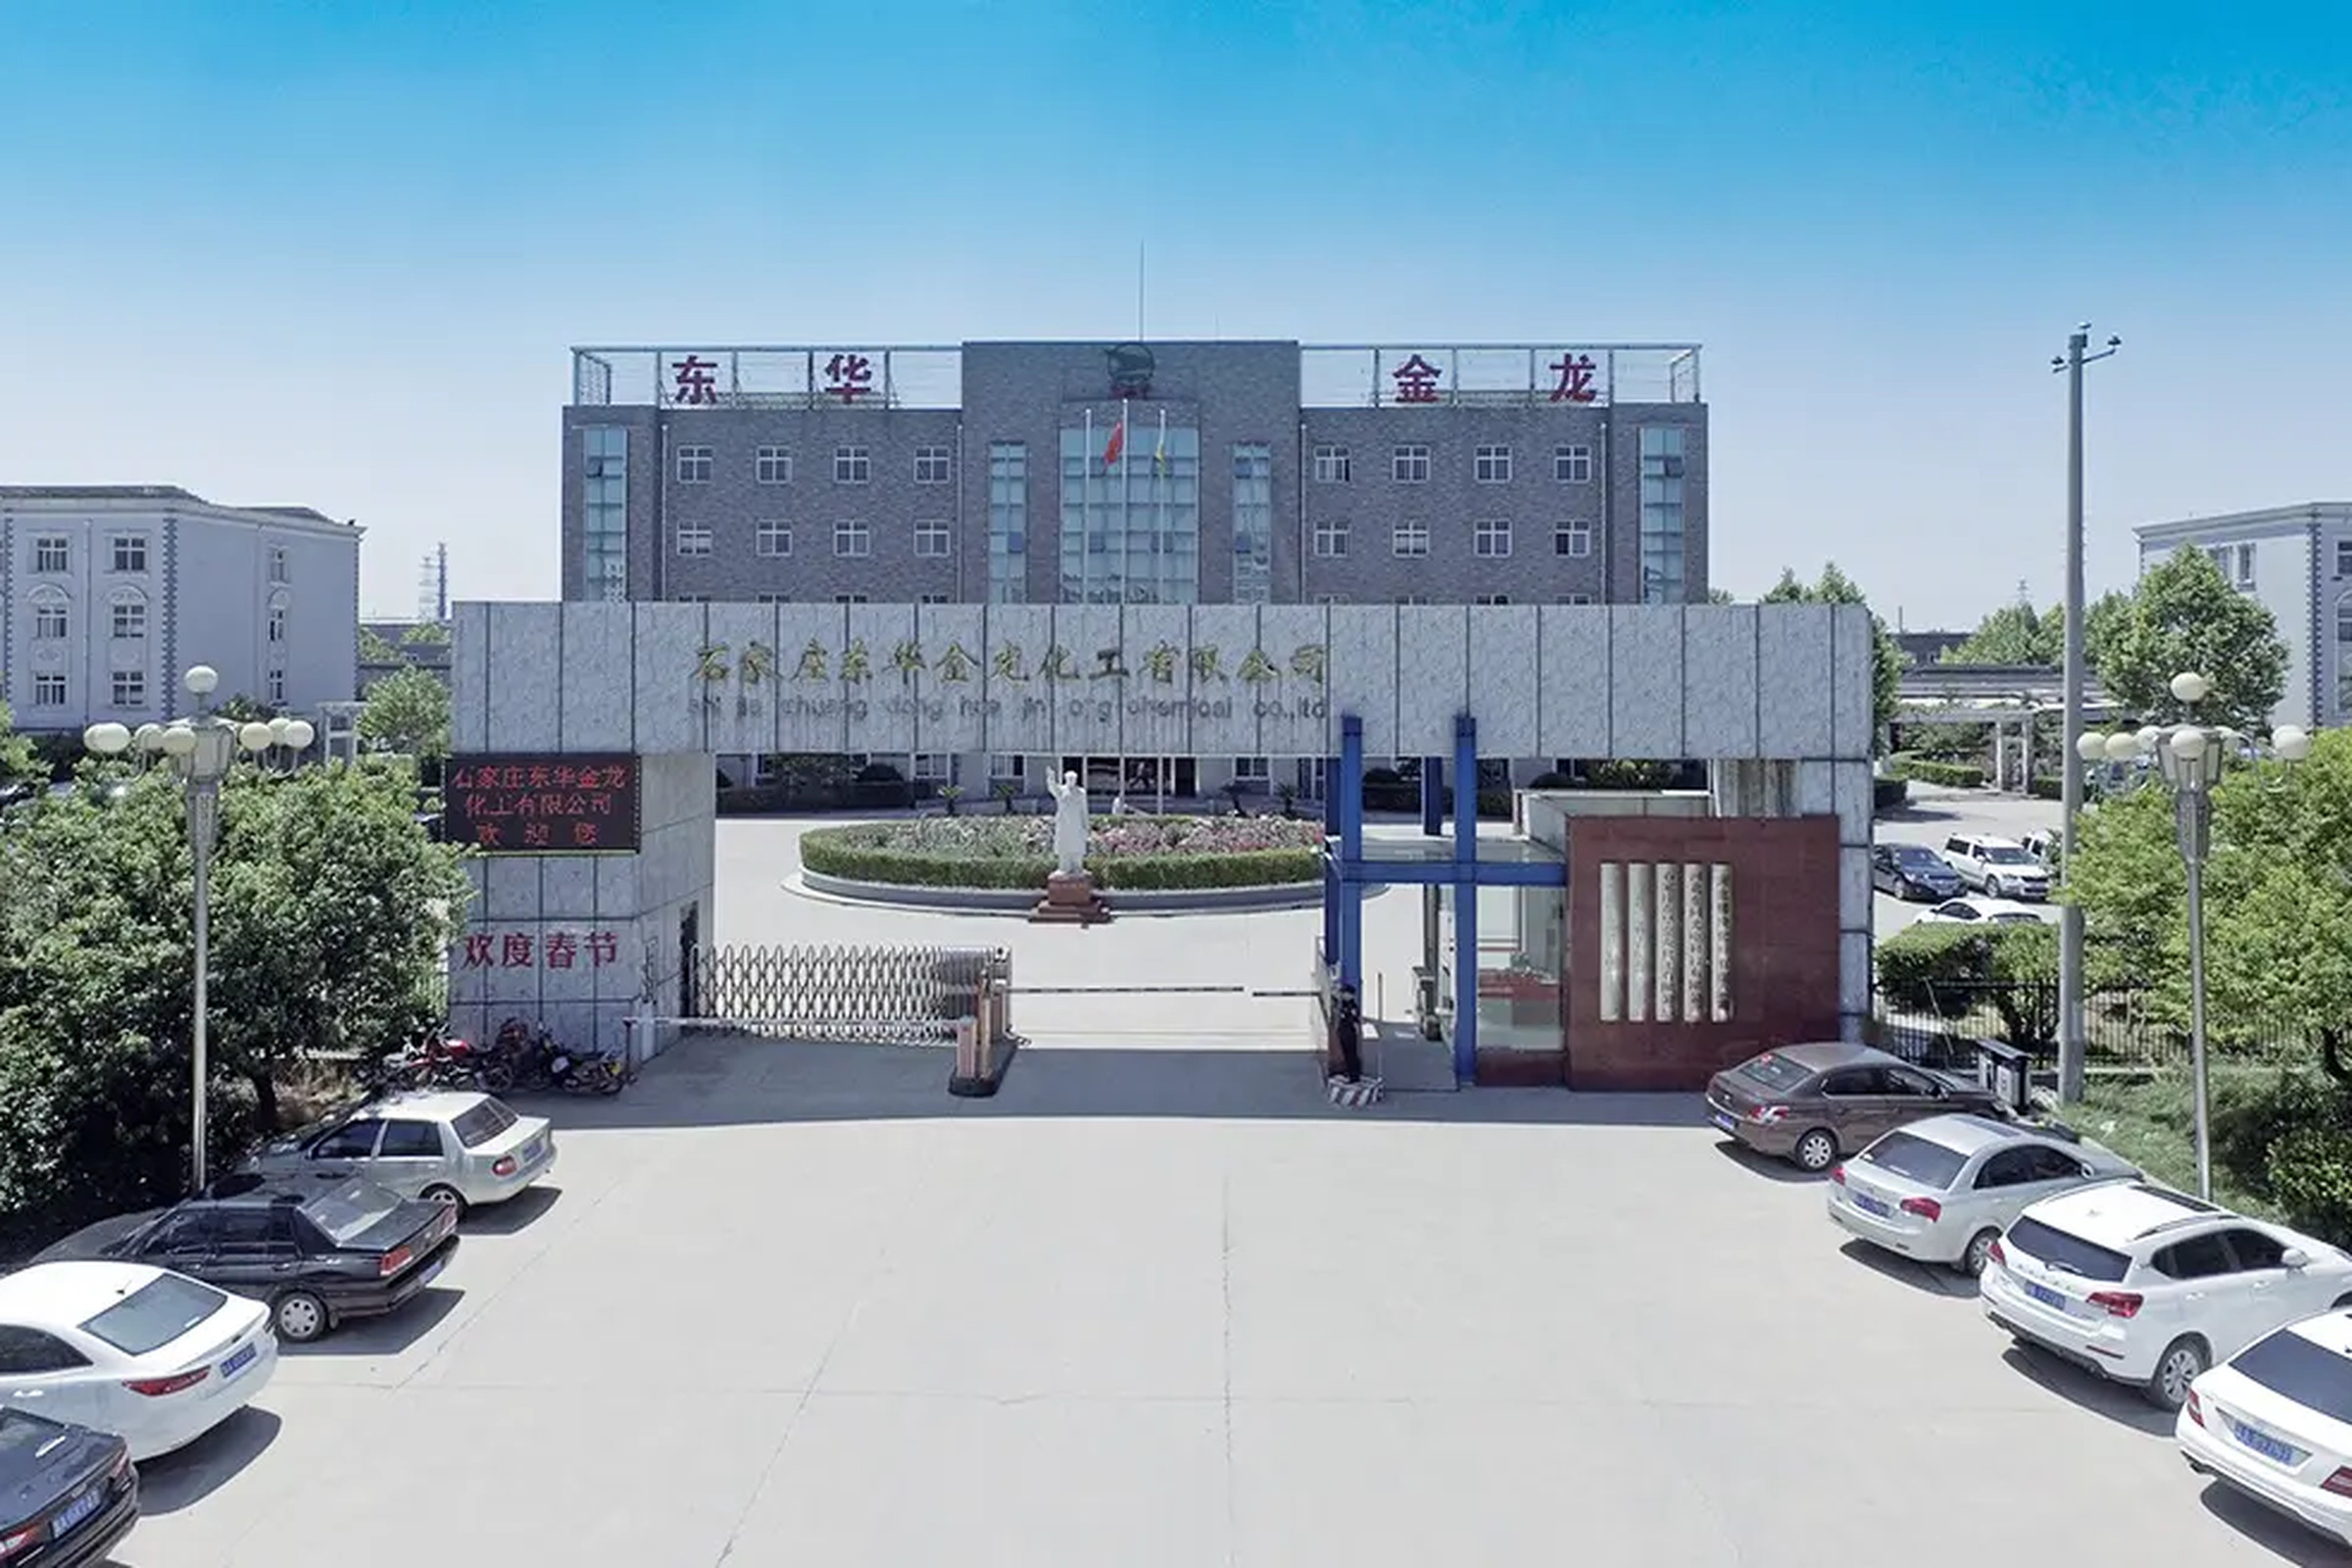 A picture of the entrance to Donghua Jinlong’s factory.